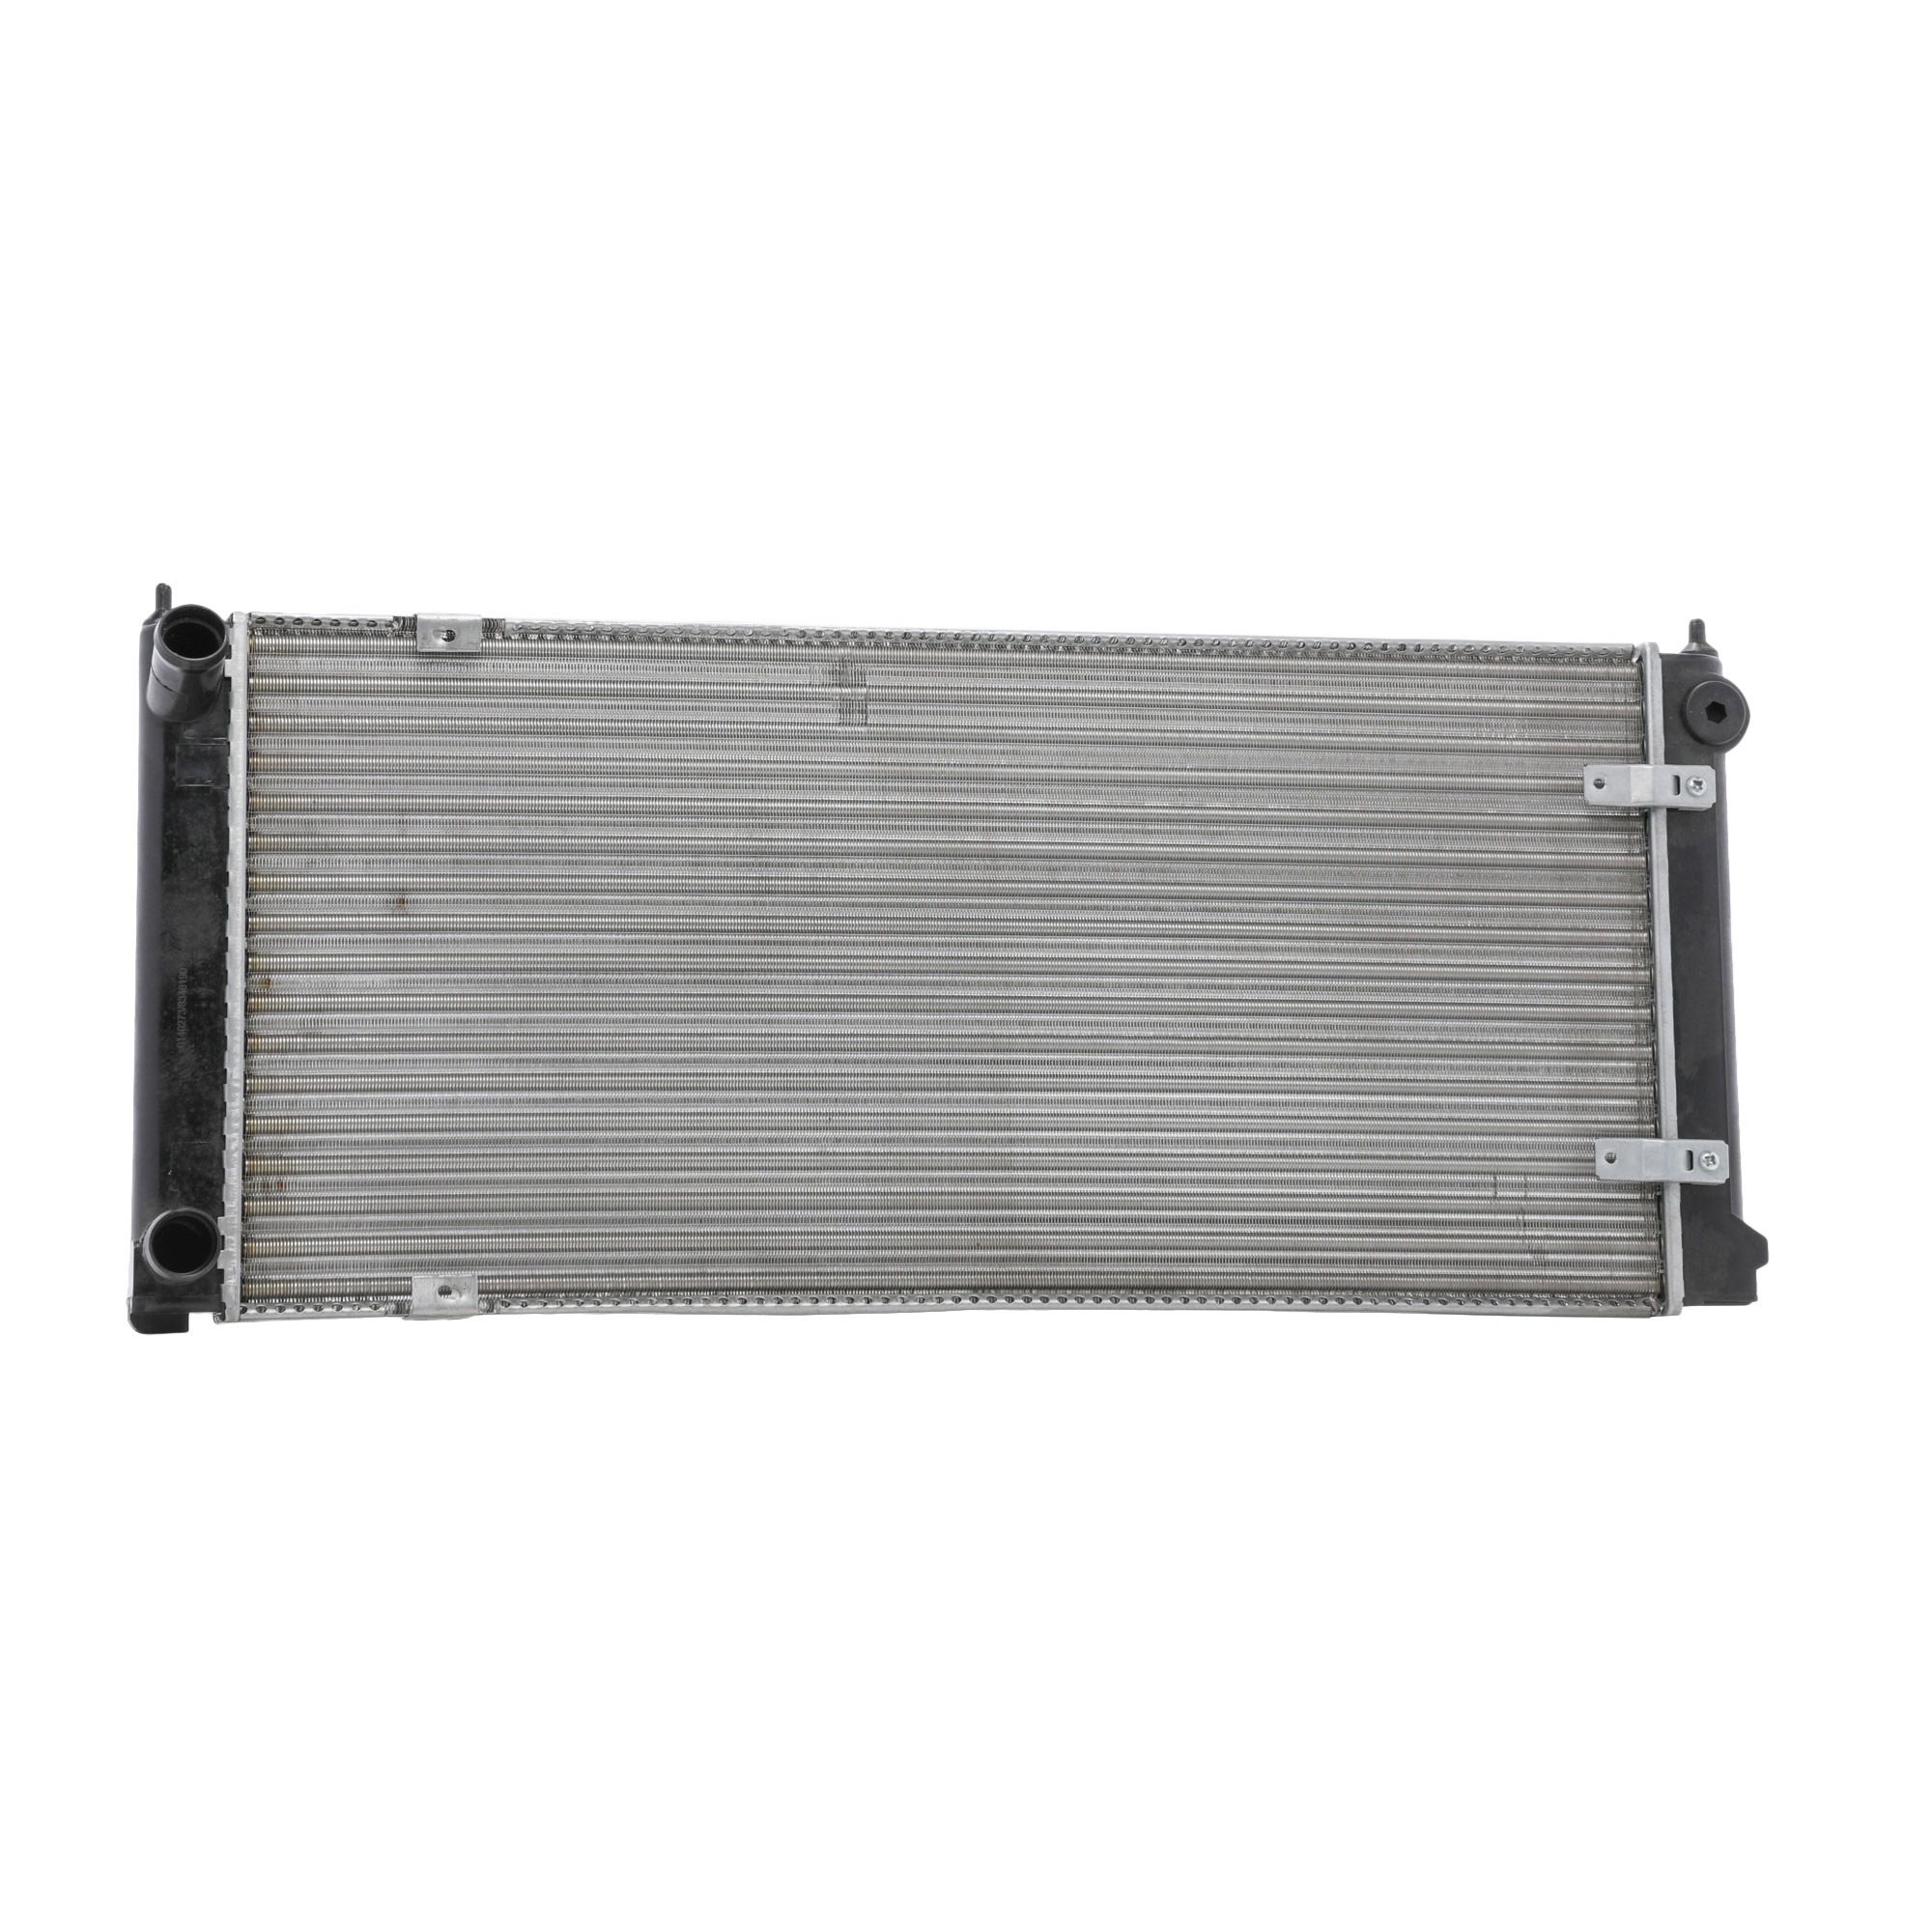 STARK SKRD-0120642 Engine radiator Aluminium, Plastic, for vehicles without air conditioning, without frame, Manual Transmission